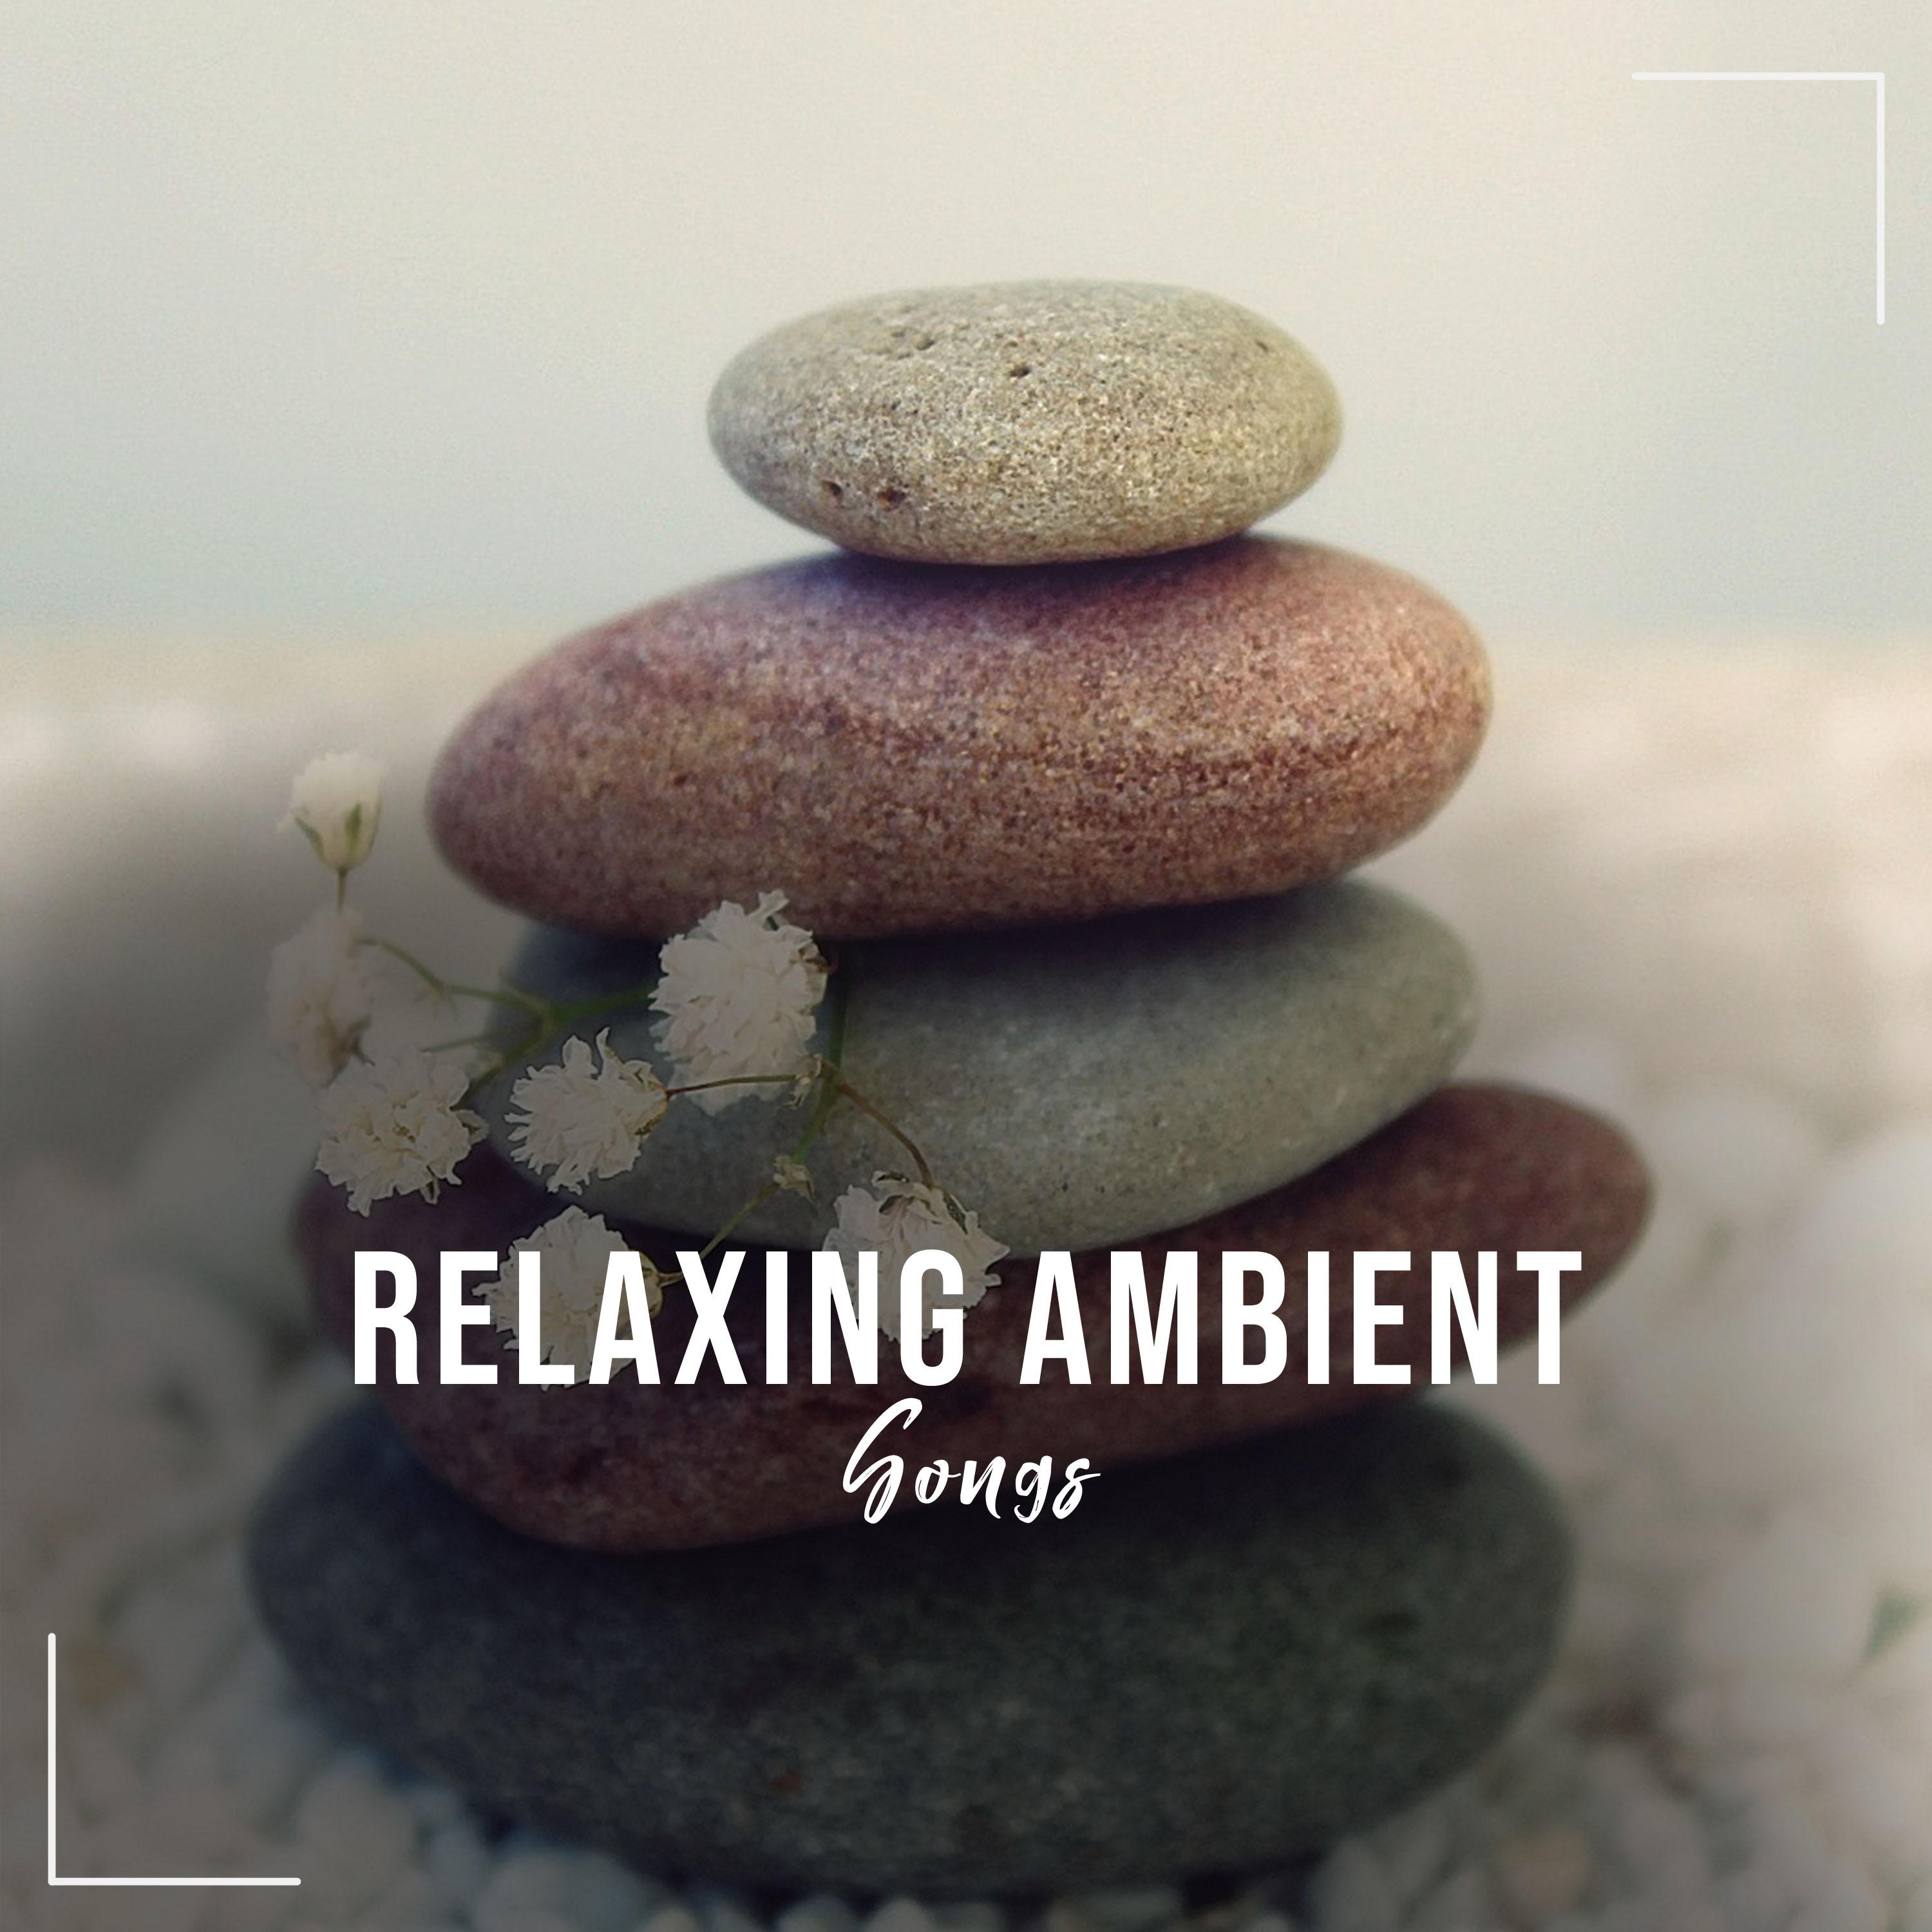 #1 Hour Relaxing, Ambient Songs for Practicing Calm